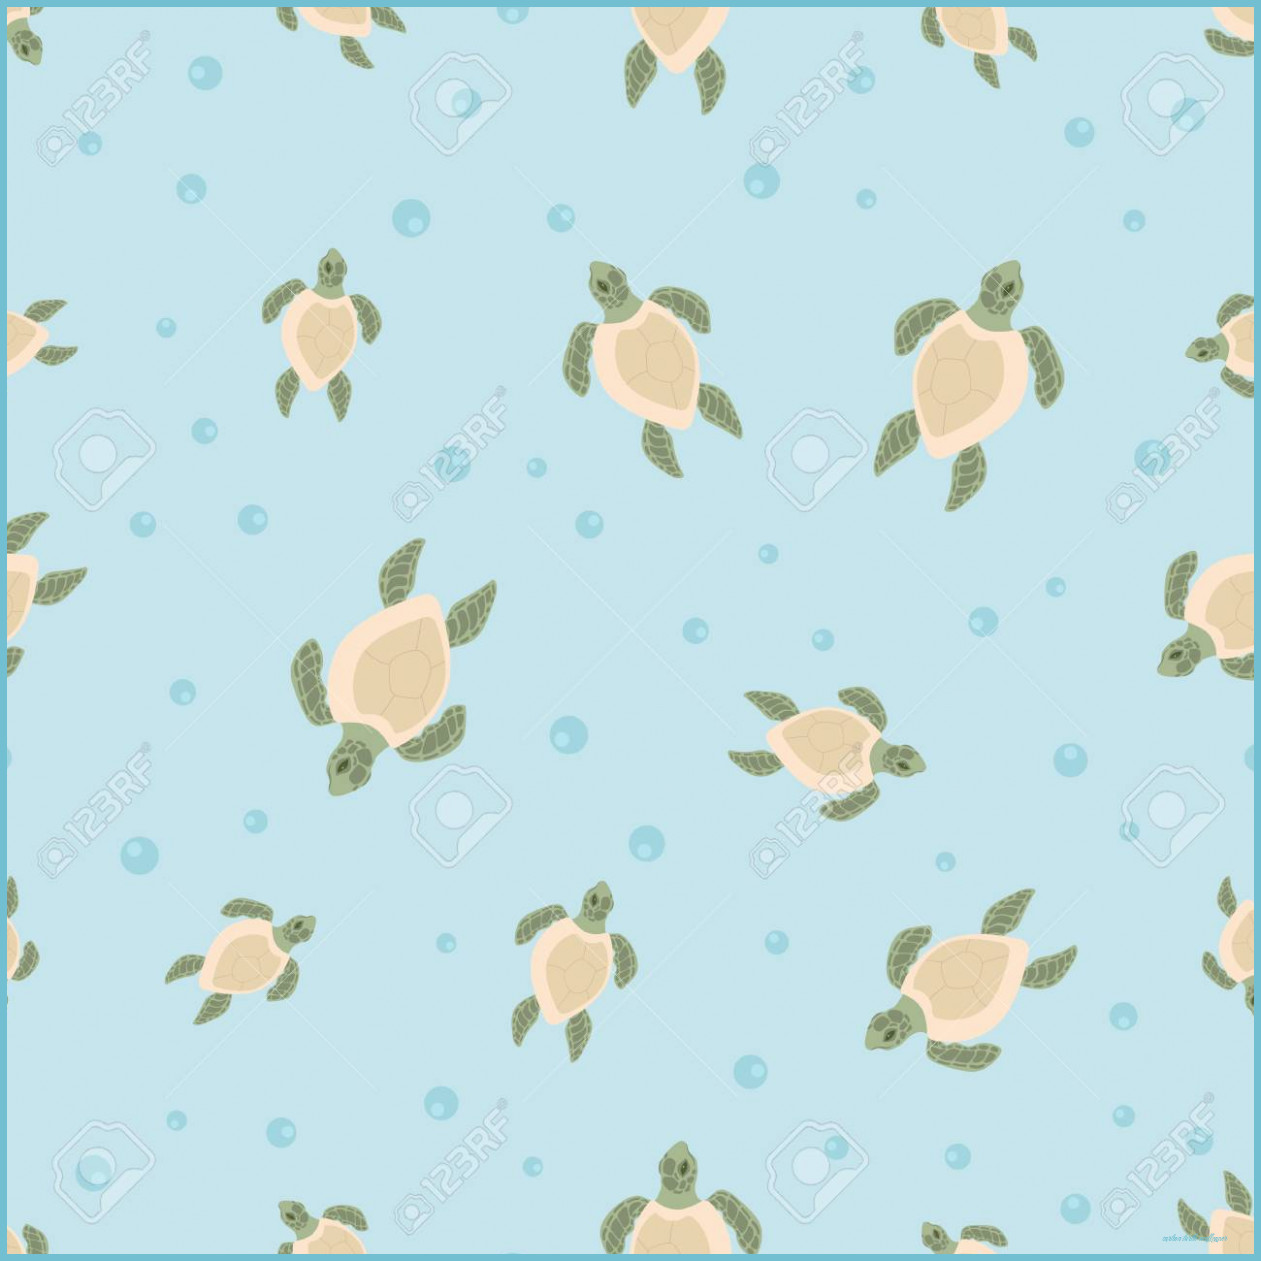 Seamless Pattern With Cute Turtles In Blue Water With Air Bubbles